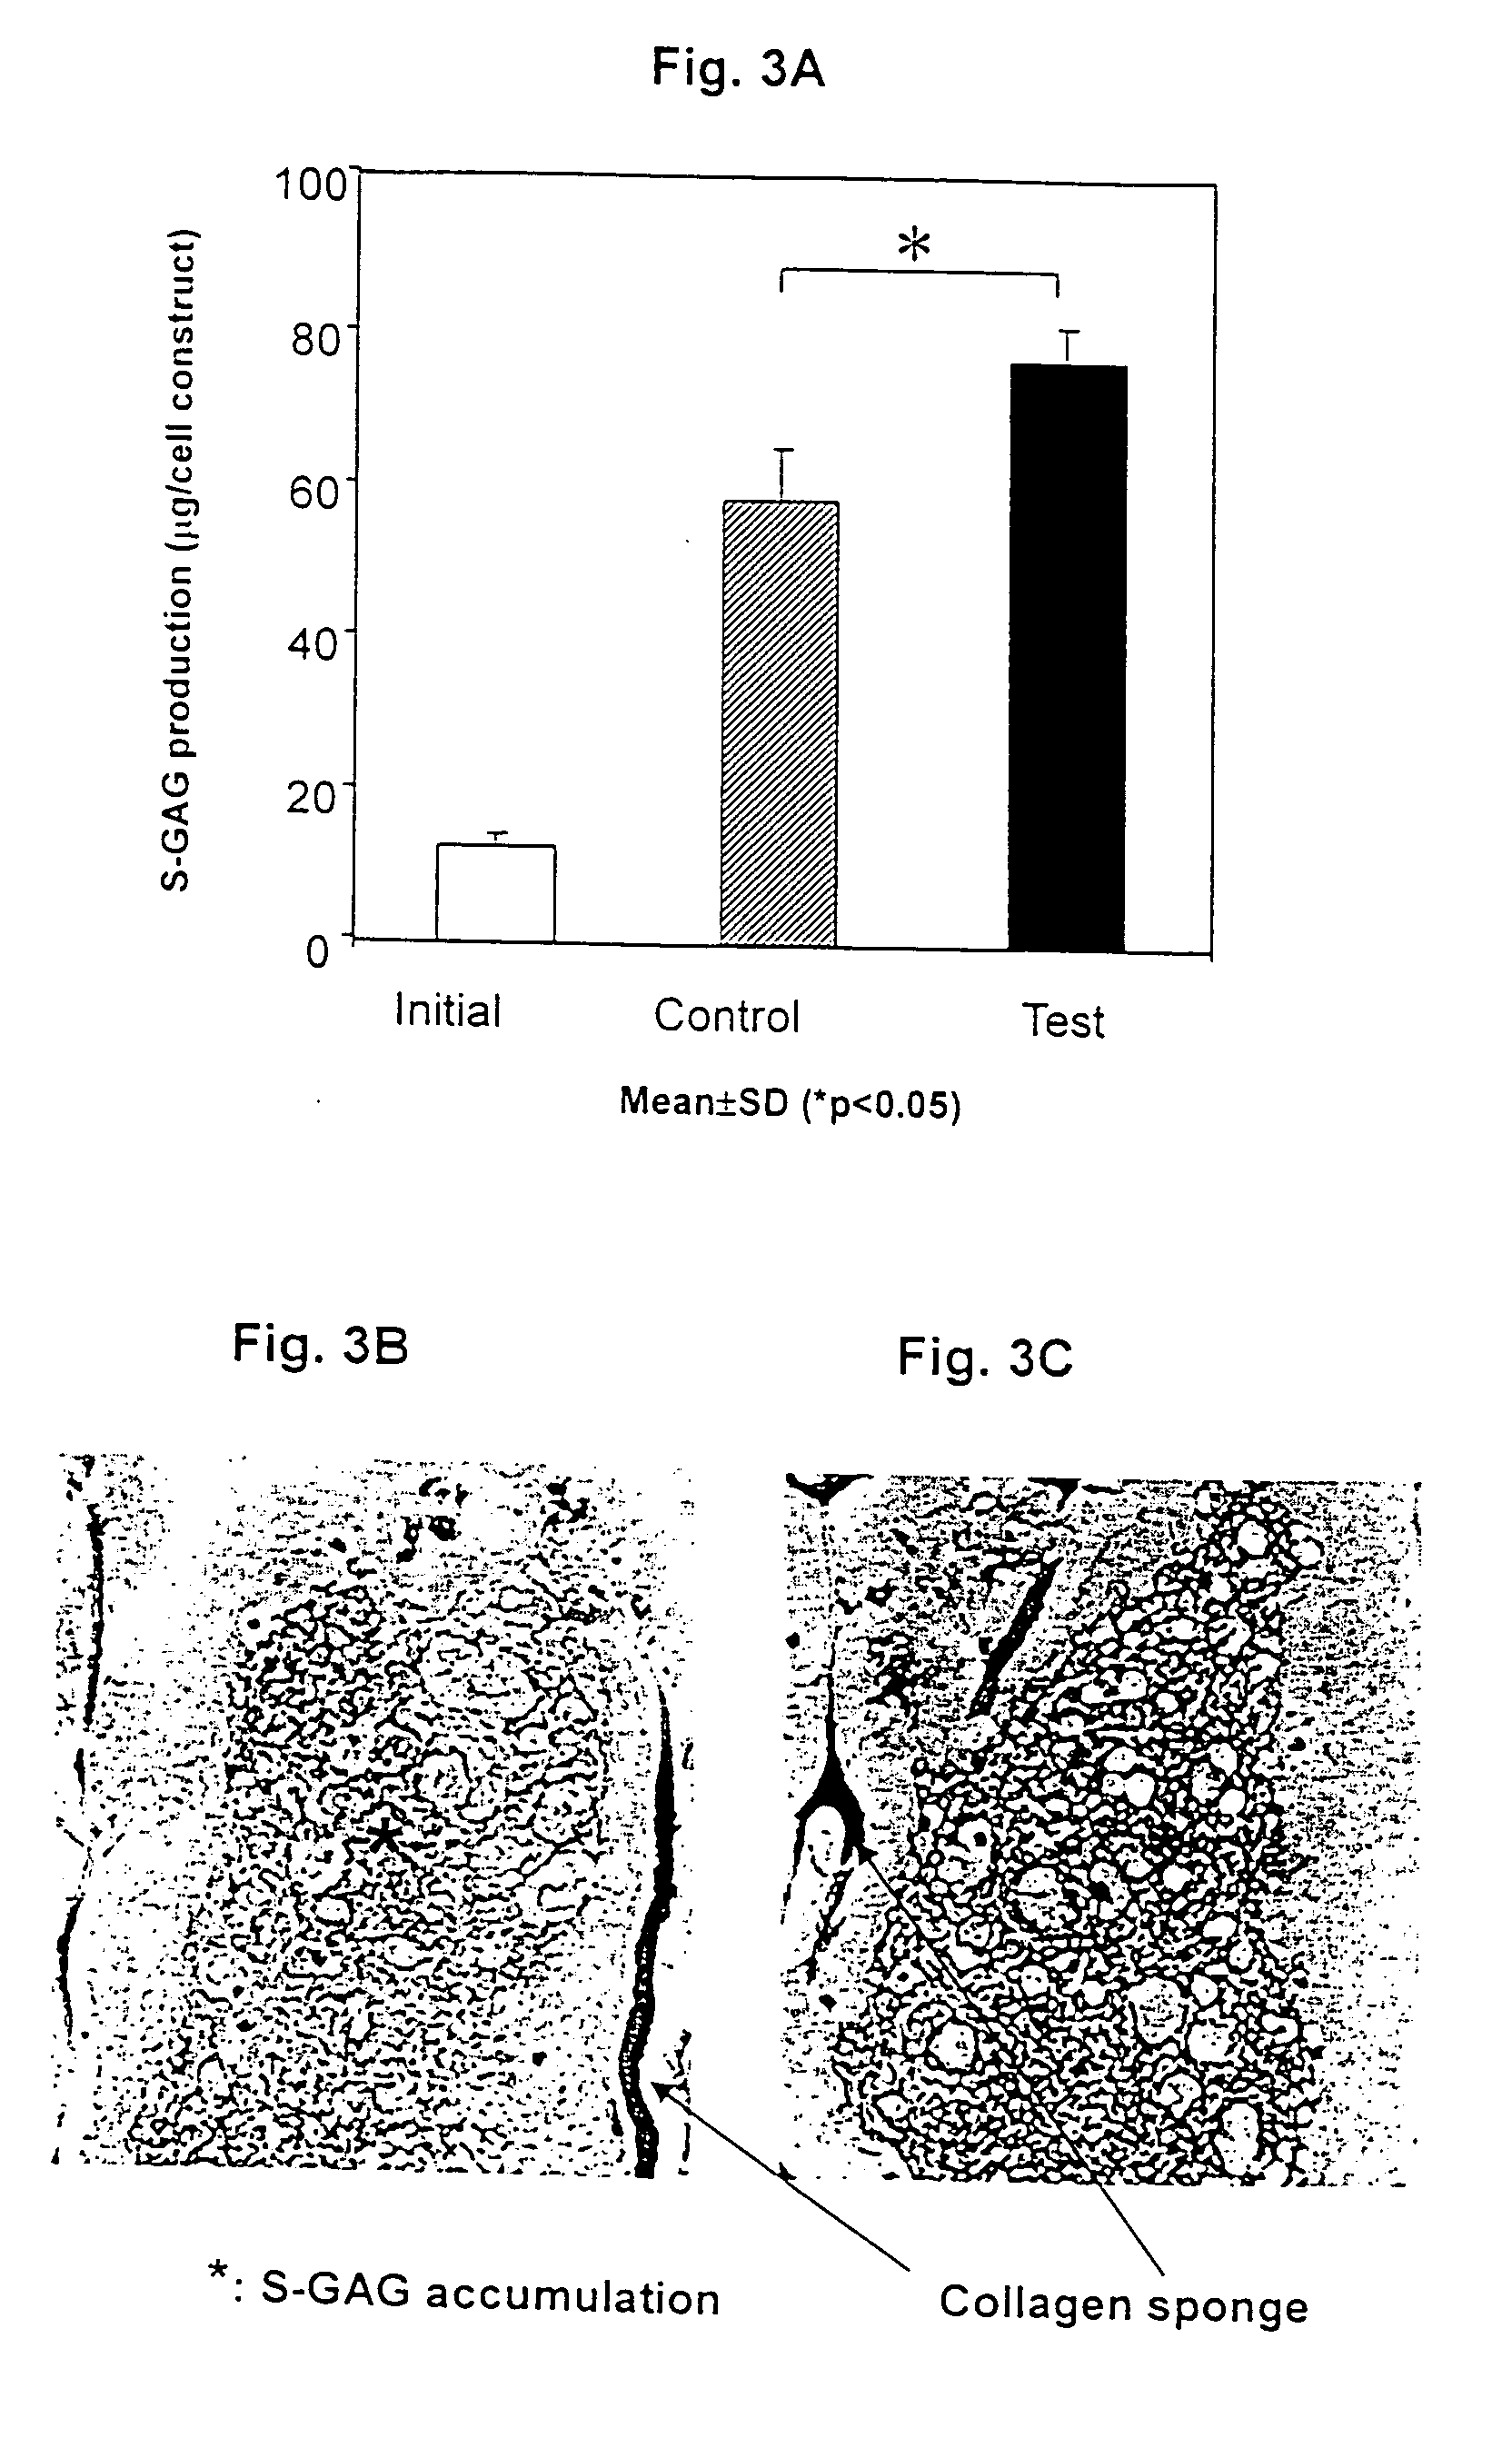 Method for preparation of neo-cartilage constructs